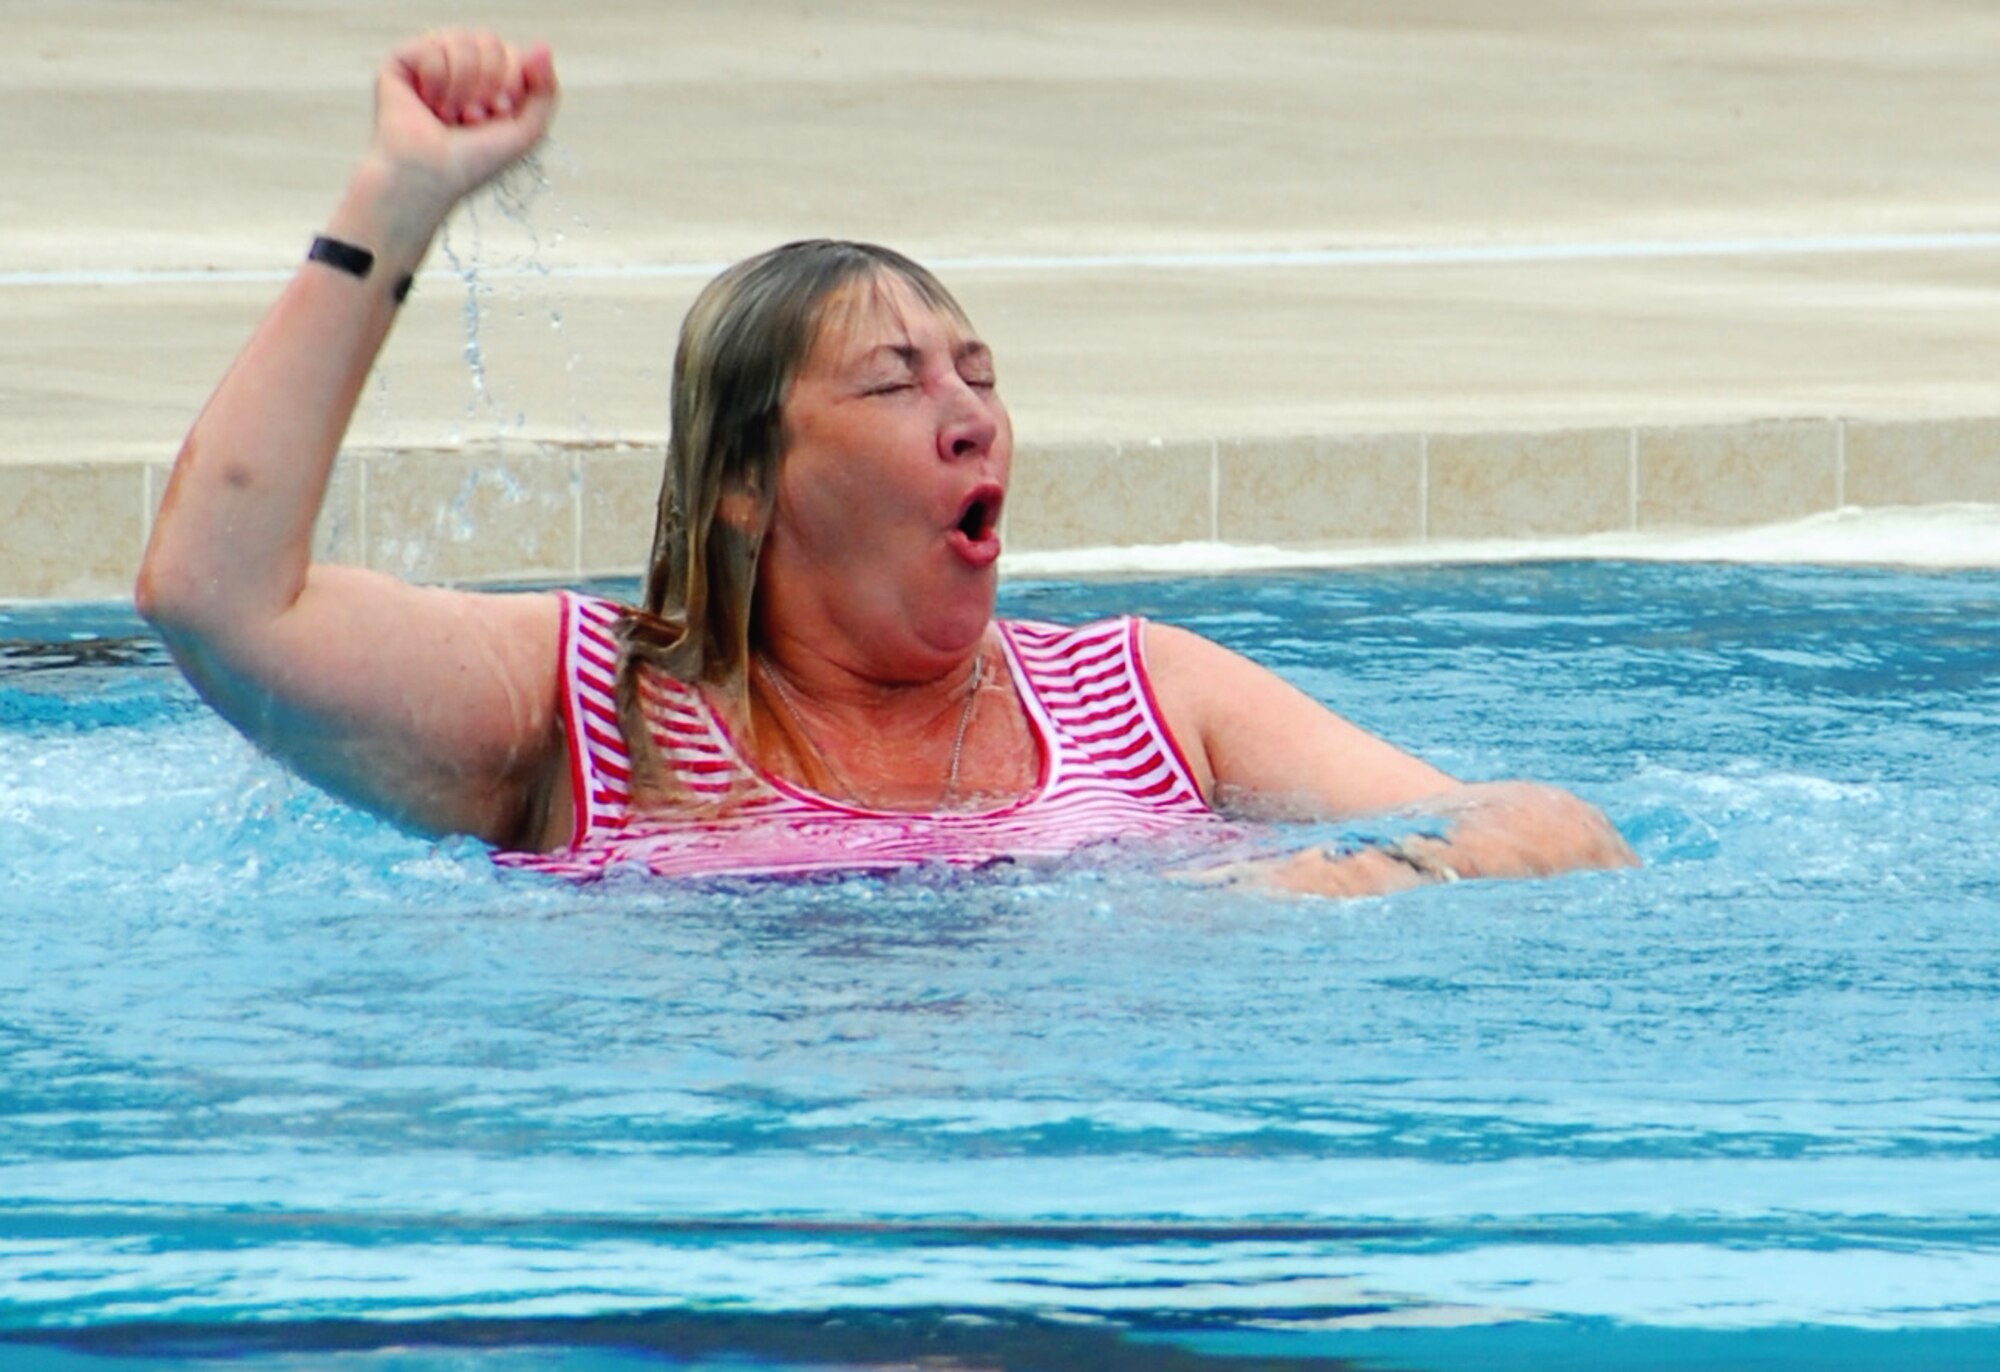 Debra Bastain, the mother of fallen Air Force special tactics officer Capt. Derek Argel, takes an impromptu dive into the pool at the aquatics training facility dedicated in Capt. Argel's memory at Hurlburt Field, Fla., May 30, 2007.  Capt. Argel, who died in the crash of an Iraqi air force aircraft on Memorial Day, 2005, was captain of the water polo team while a cadet at the U.S. Air Force Academy.  (US Air Force photo by Chief Master Sgt. Gary Emery) (Released)  